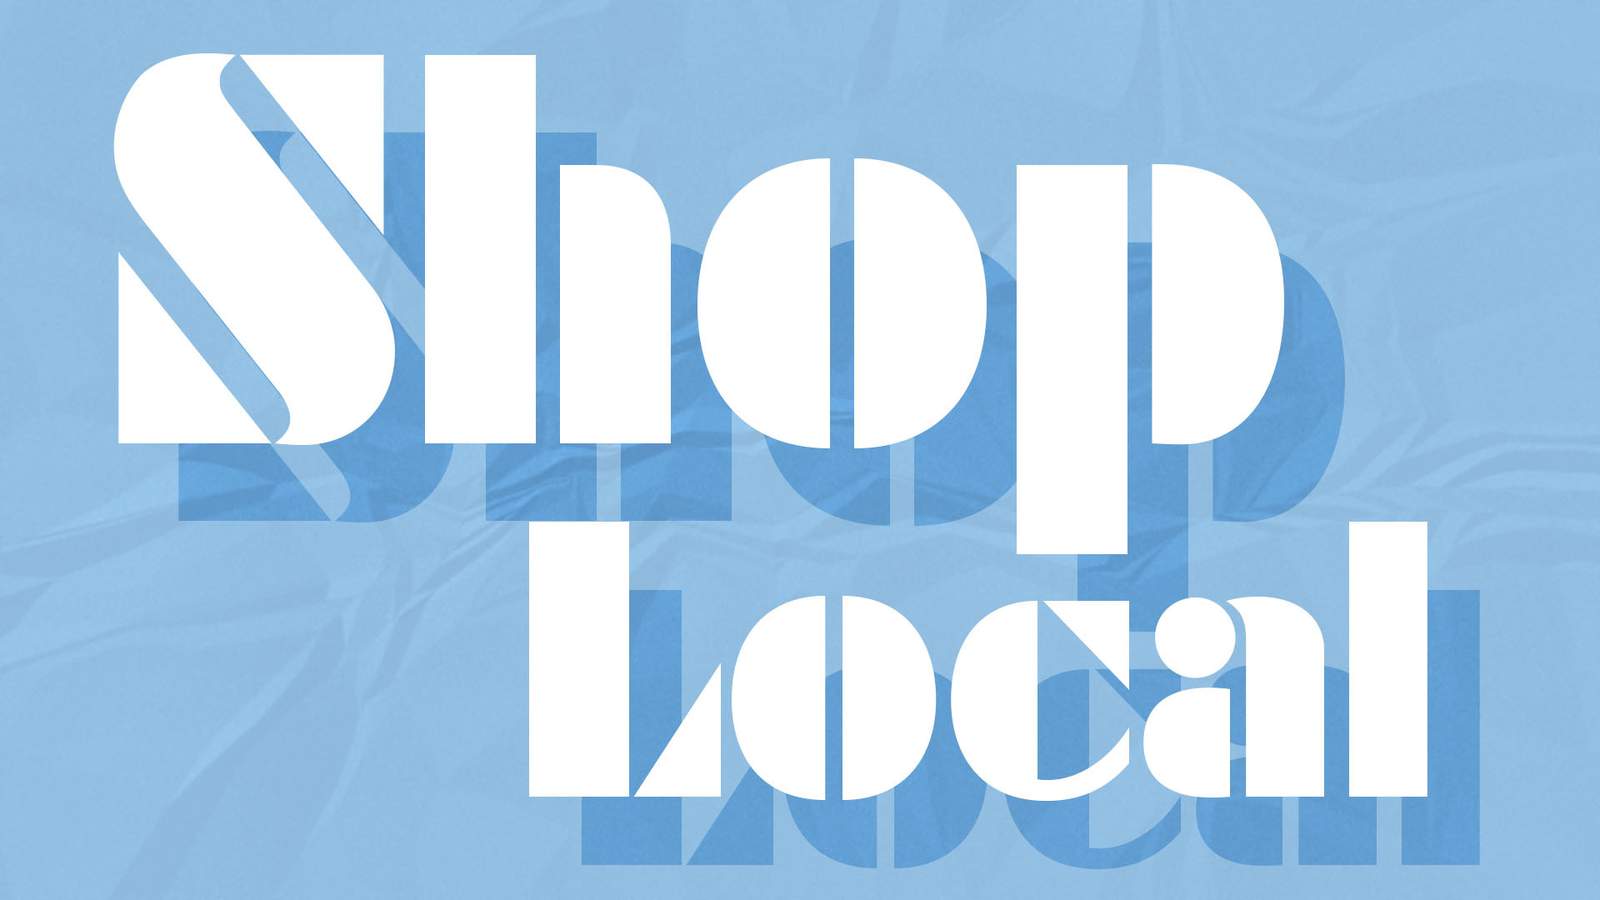 Get in the ‘shop local’ spirit with these 29 ideas from Metro Detroit businesses